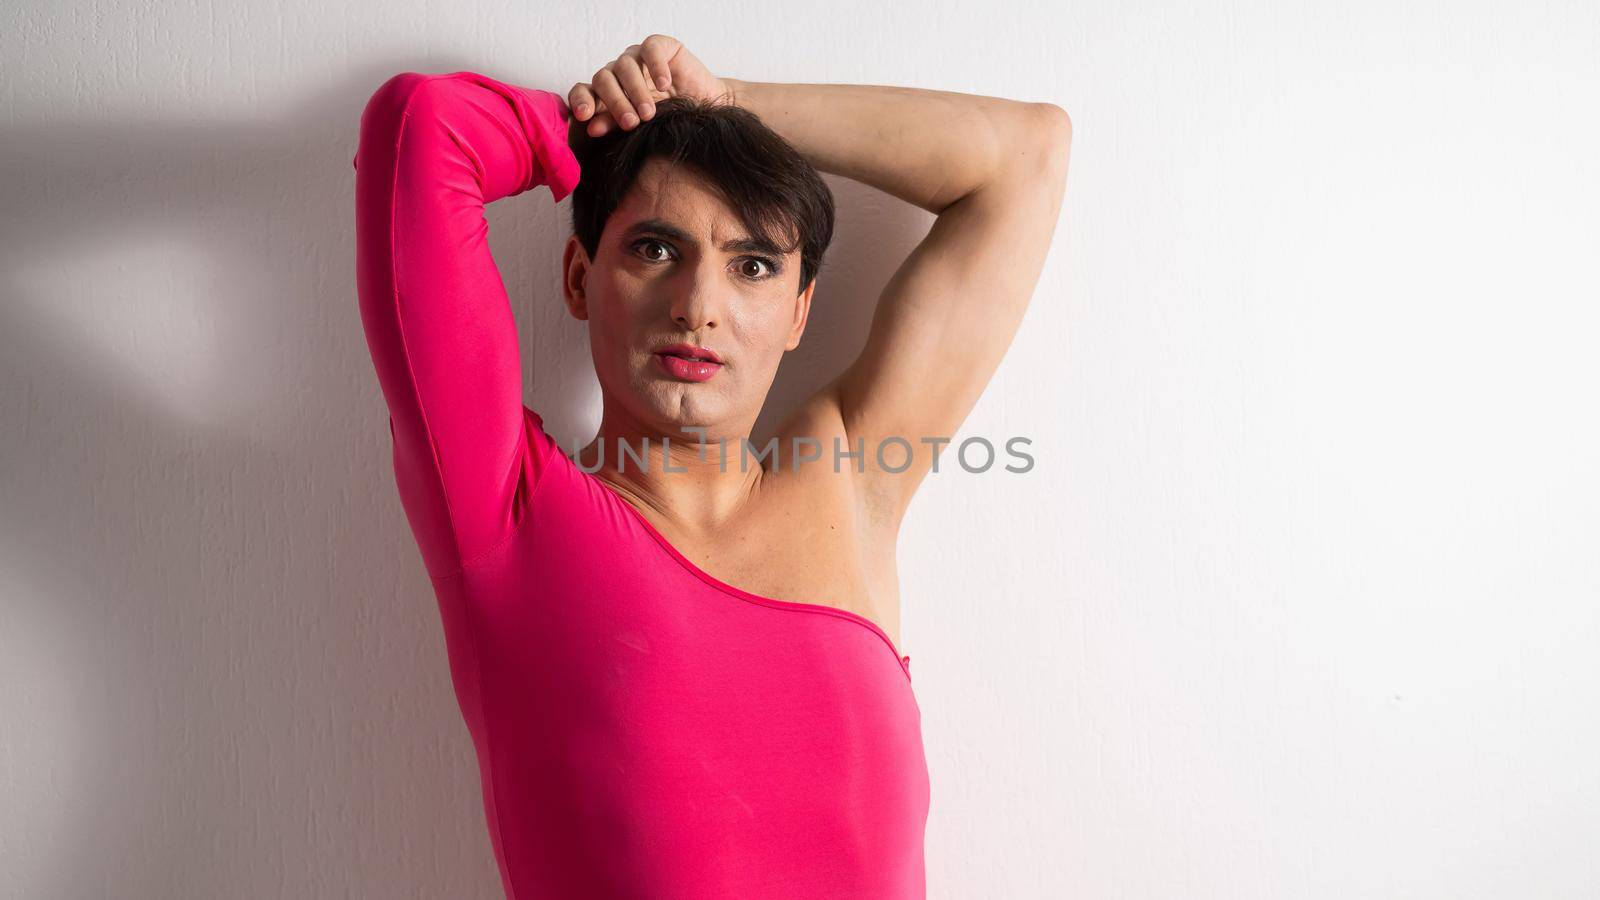 Homosexual in a pink female dress. A man in make-up. by mrwed54